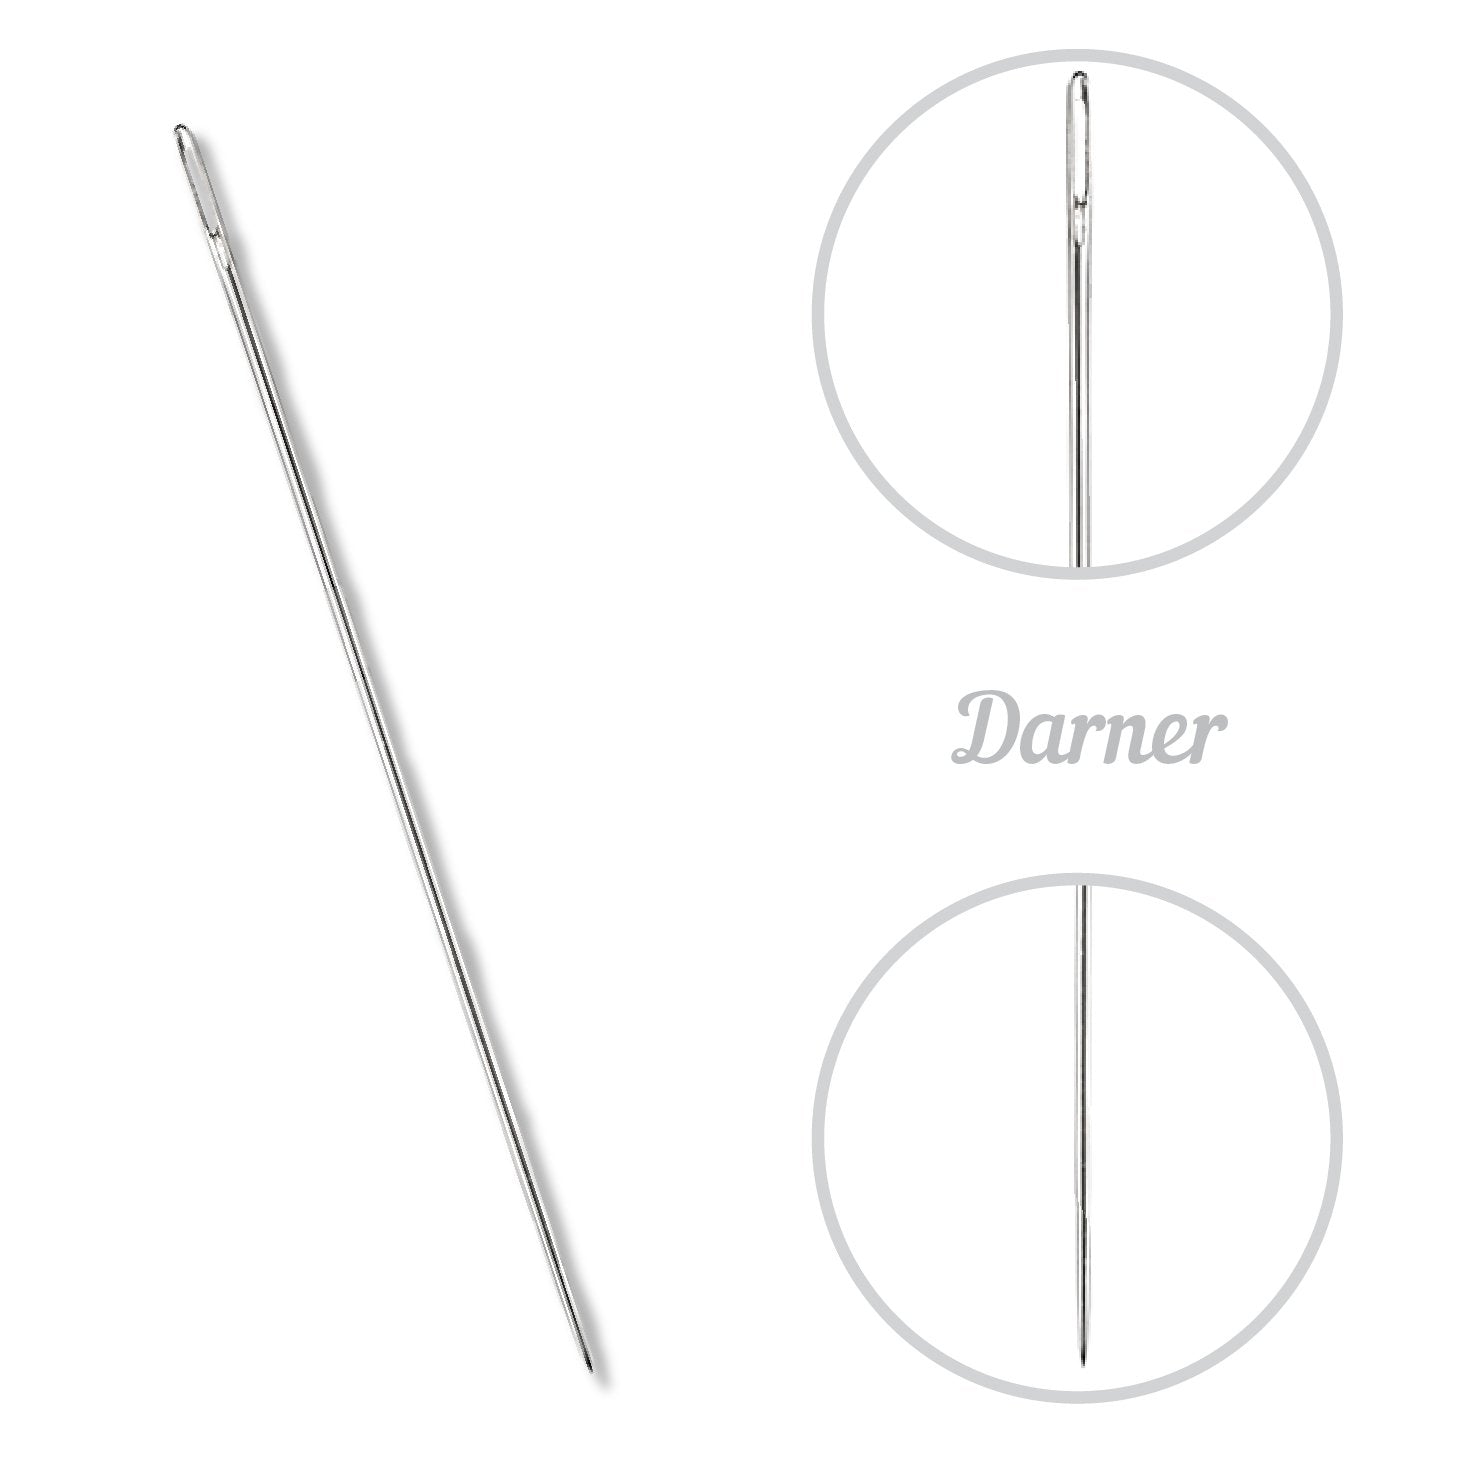 CN - Colonial Needle -Darners - Assortment - #03 - #09